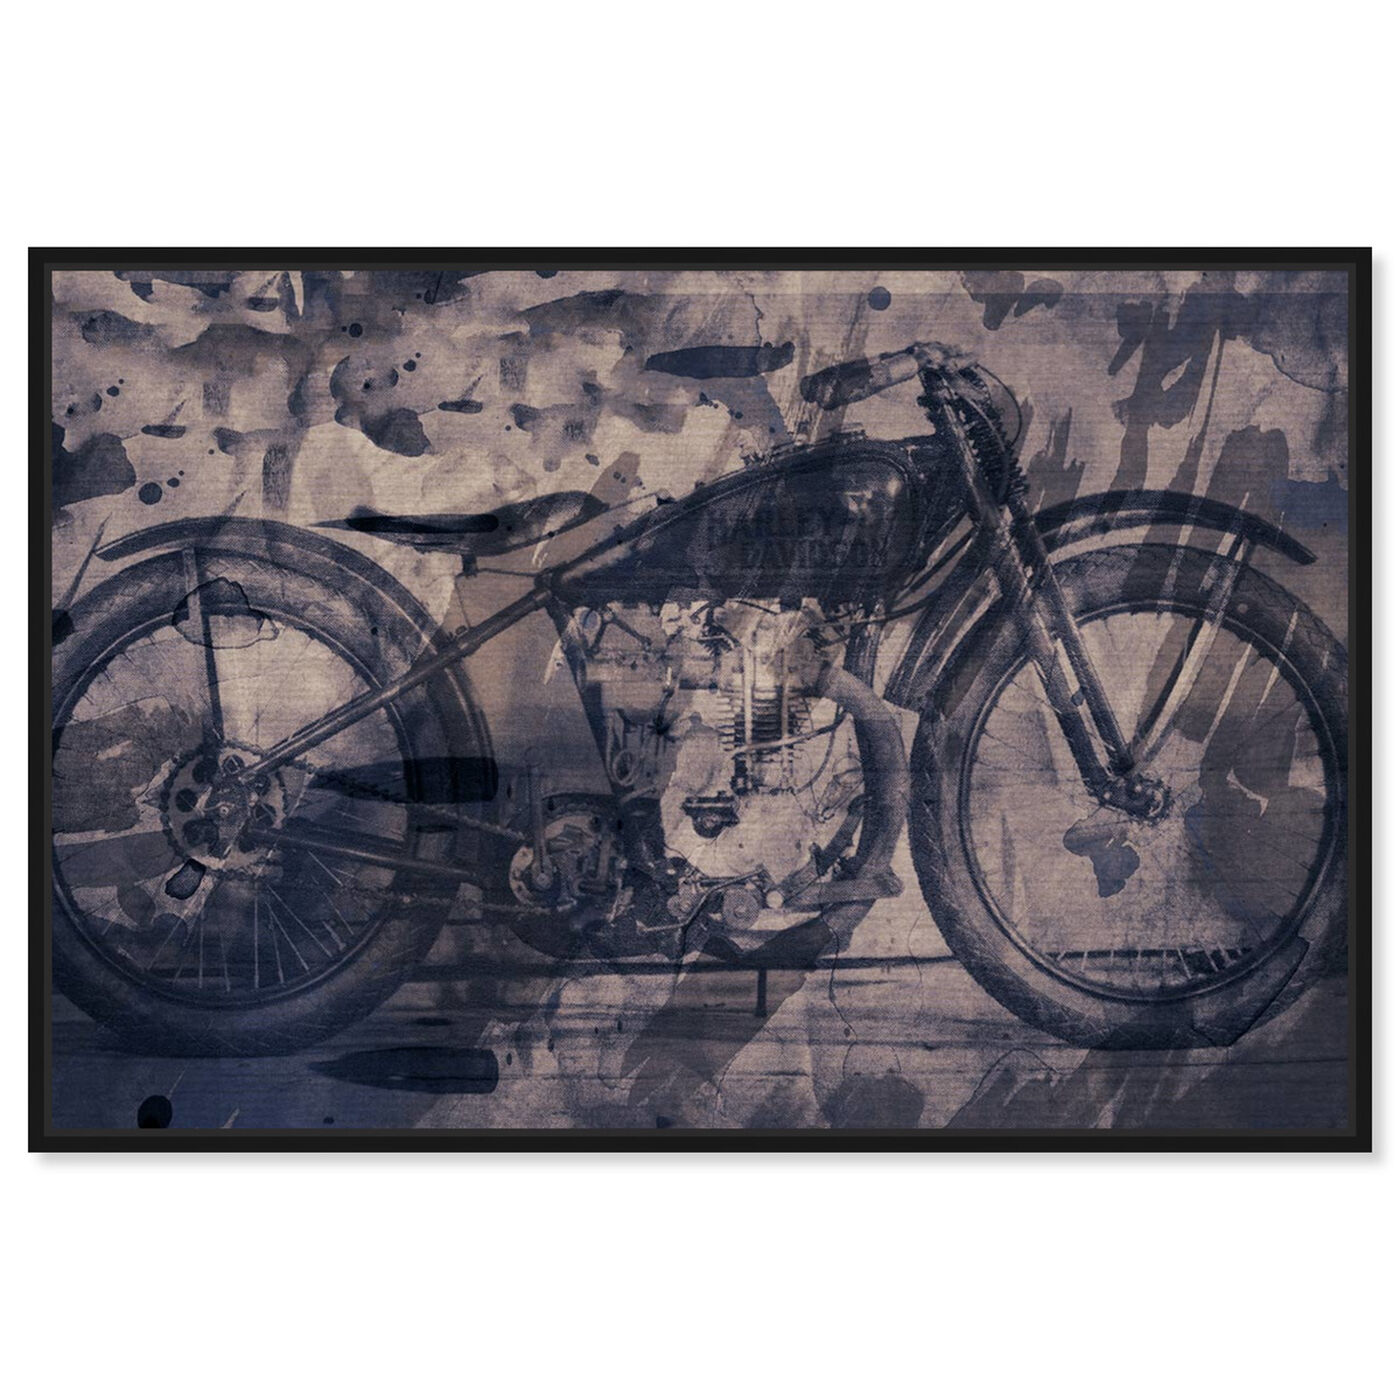 Front view of Vintage Bike featuring transportation and motorcycles art.